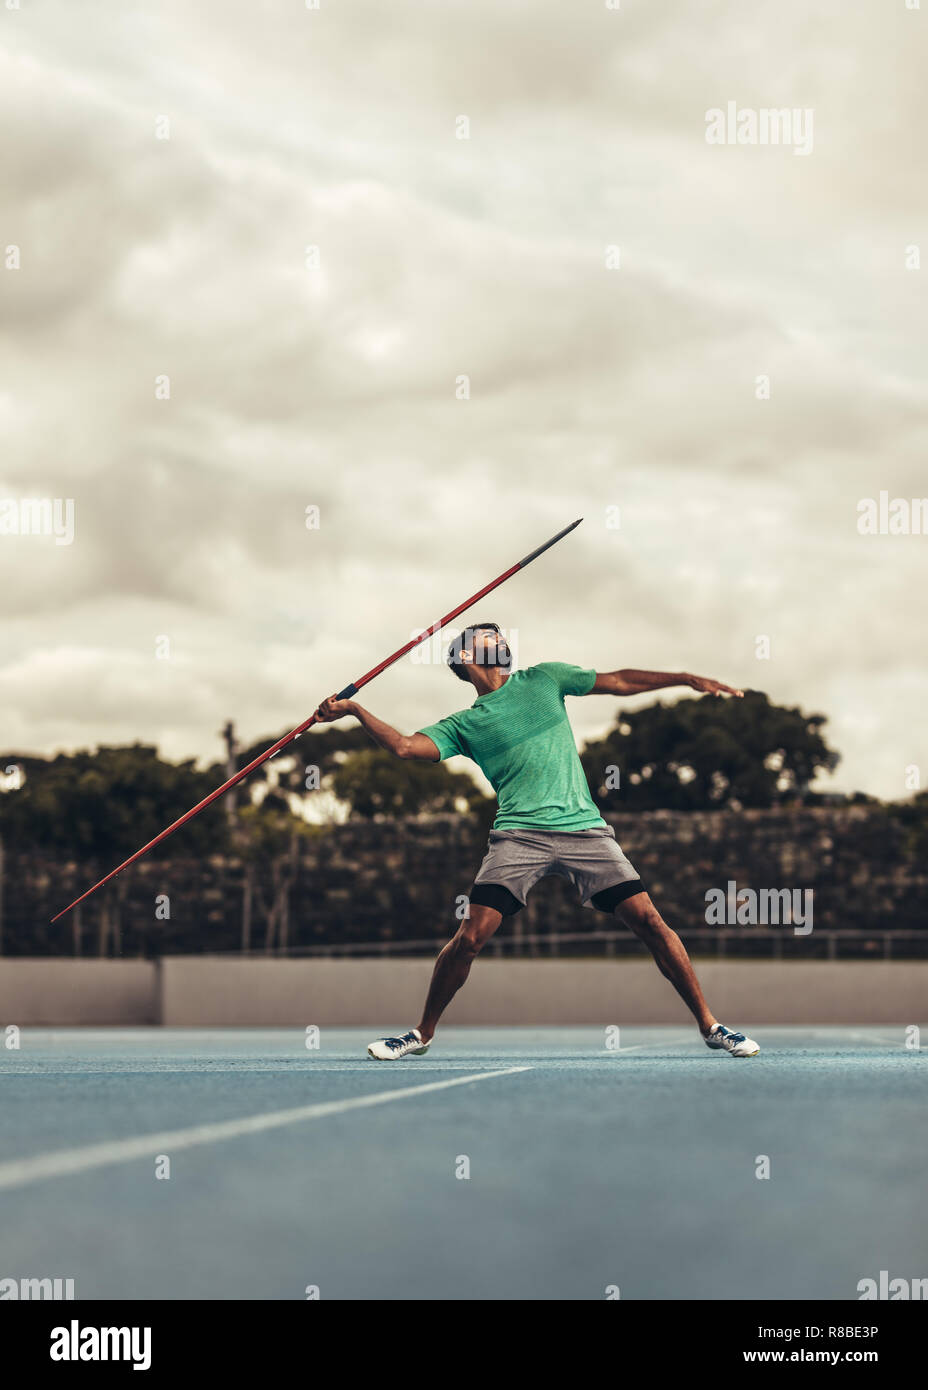 Man in position to throw a javelin in a track and field stadium. Athlete doing javelin training in the field on a cloudy day. Stock Photo